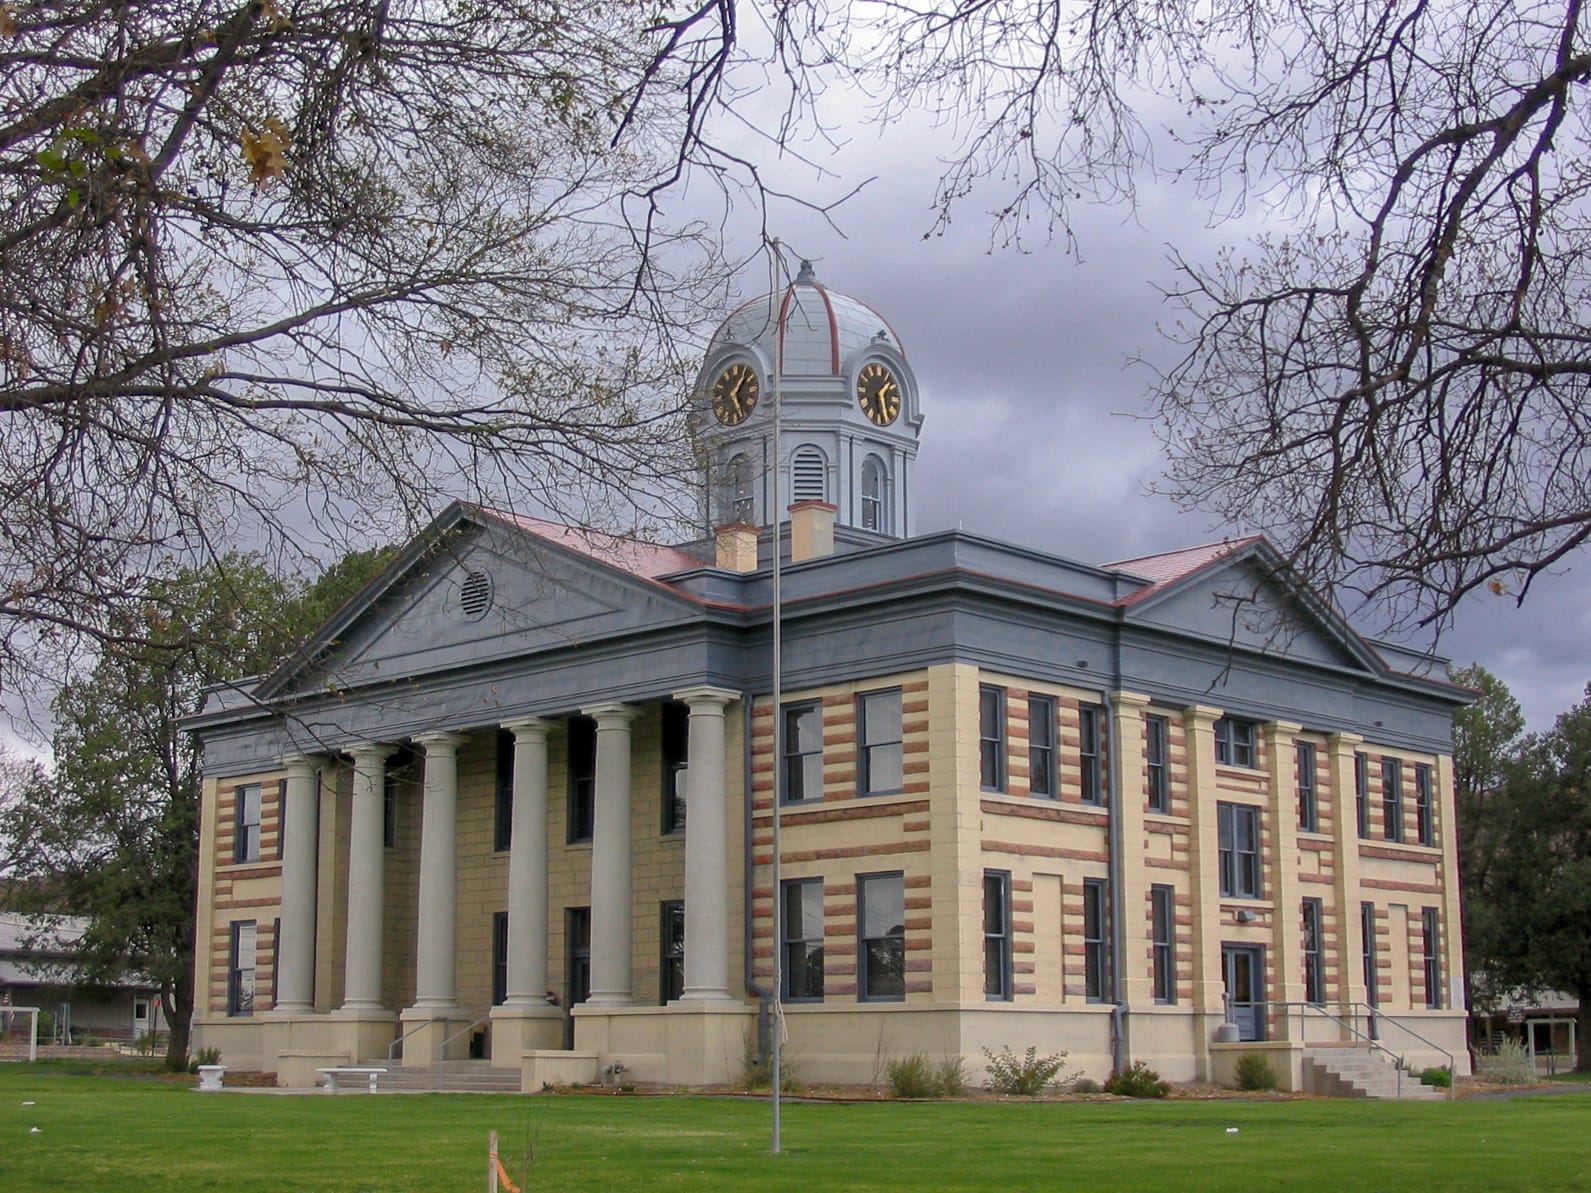 Standard county courthouse building number 28